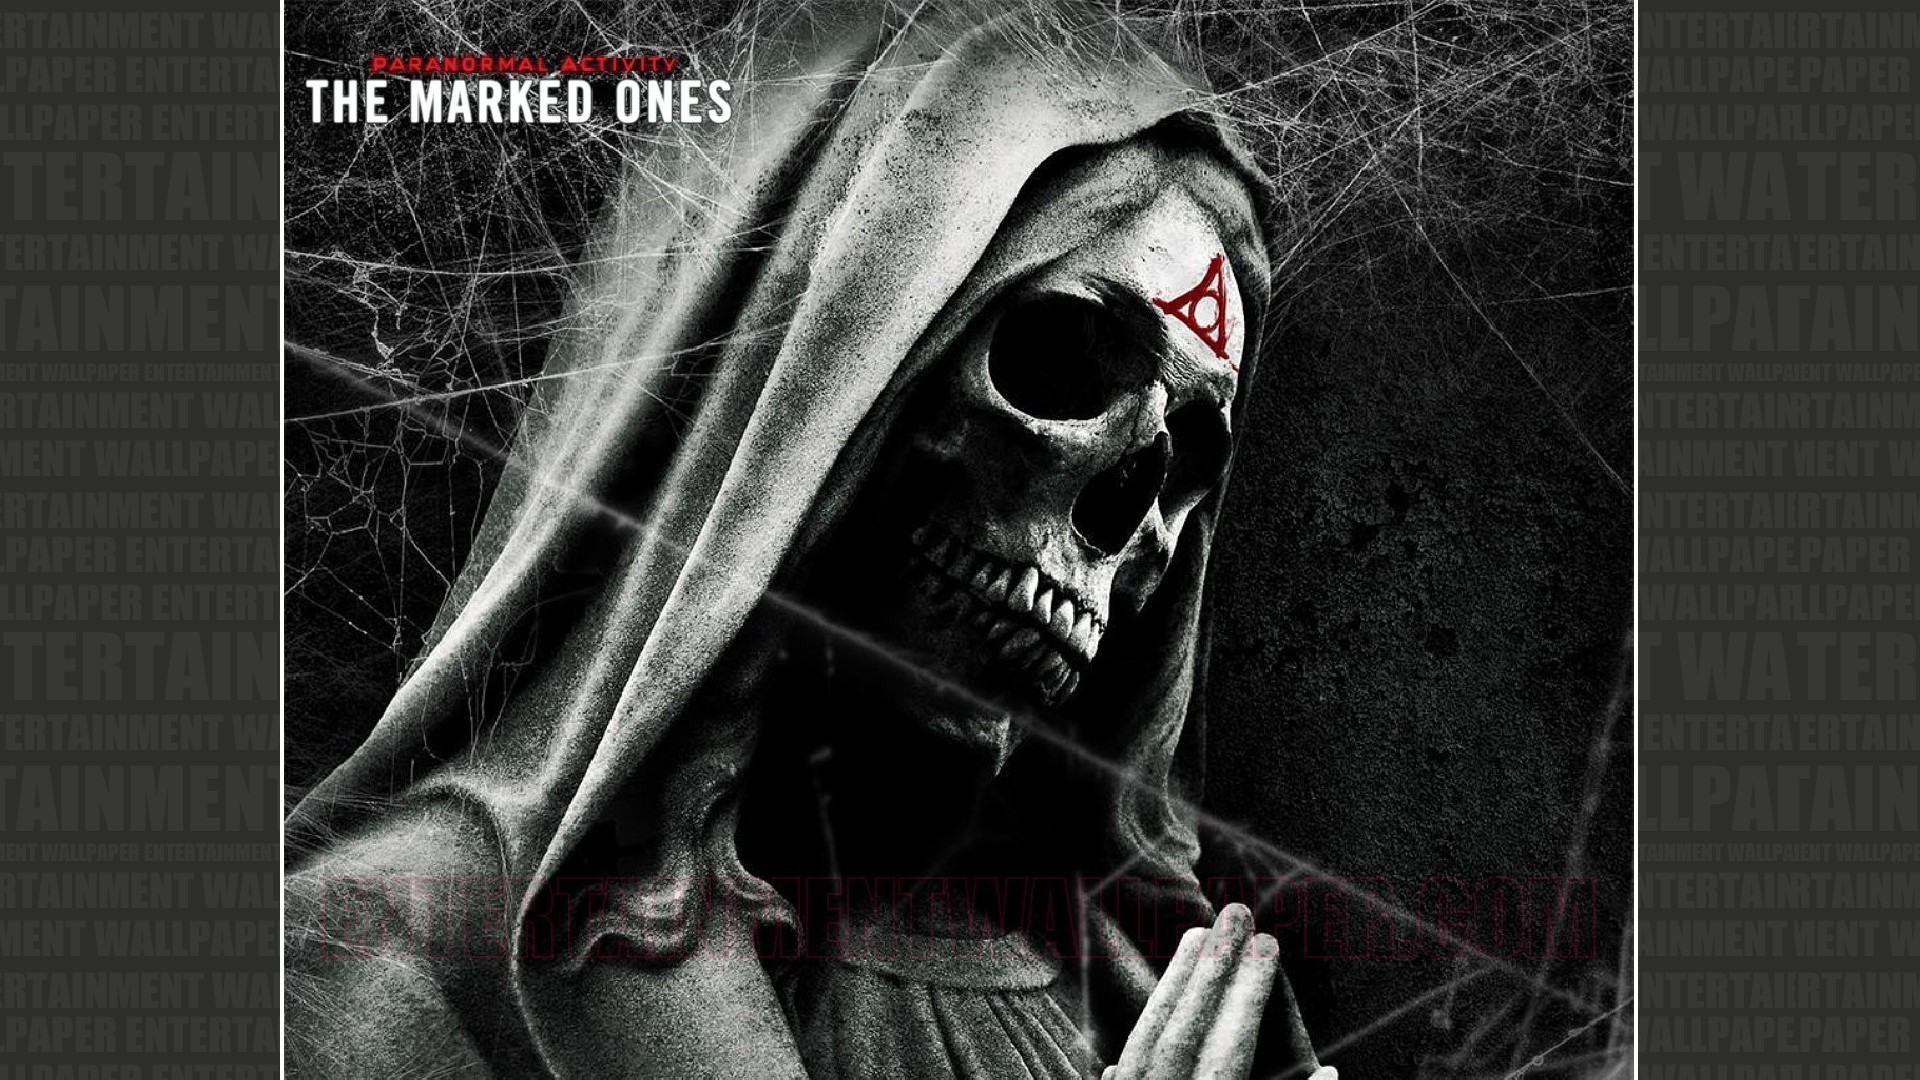 1920x1080 Paranormal Activity: The Marked Ones Wallpaper - Original size, download  now.